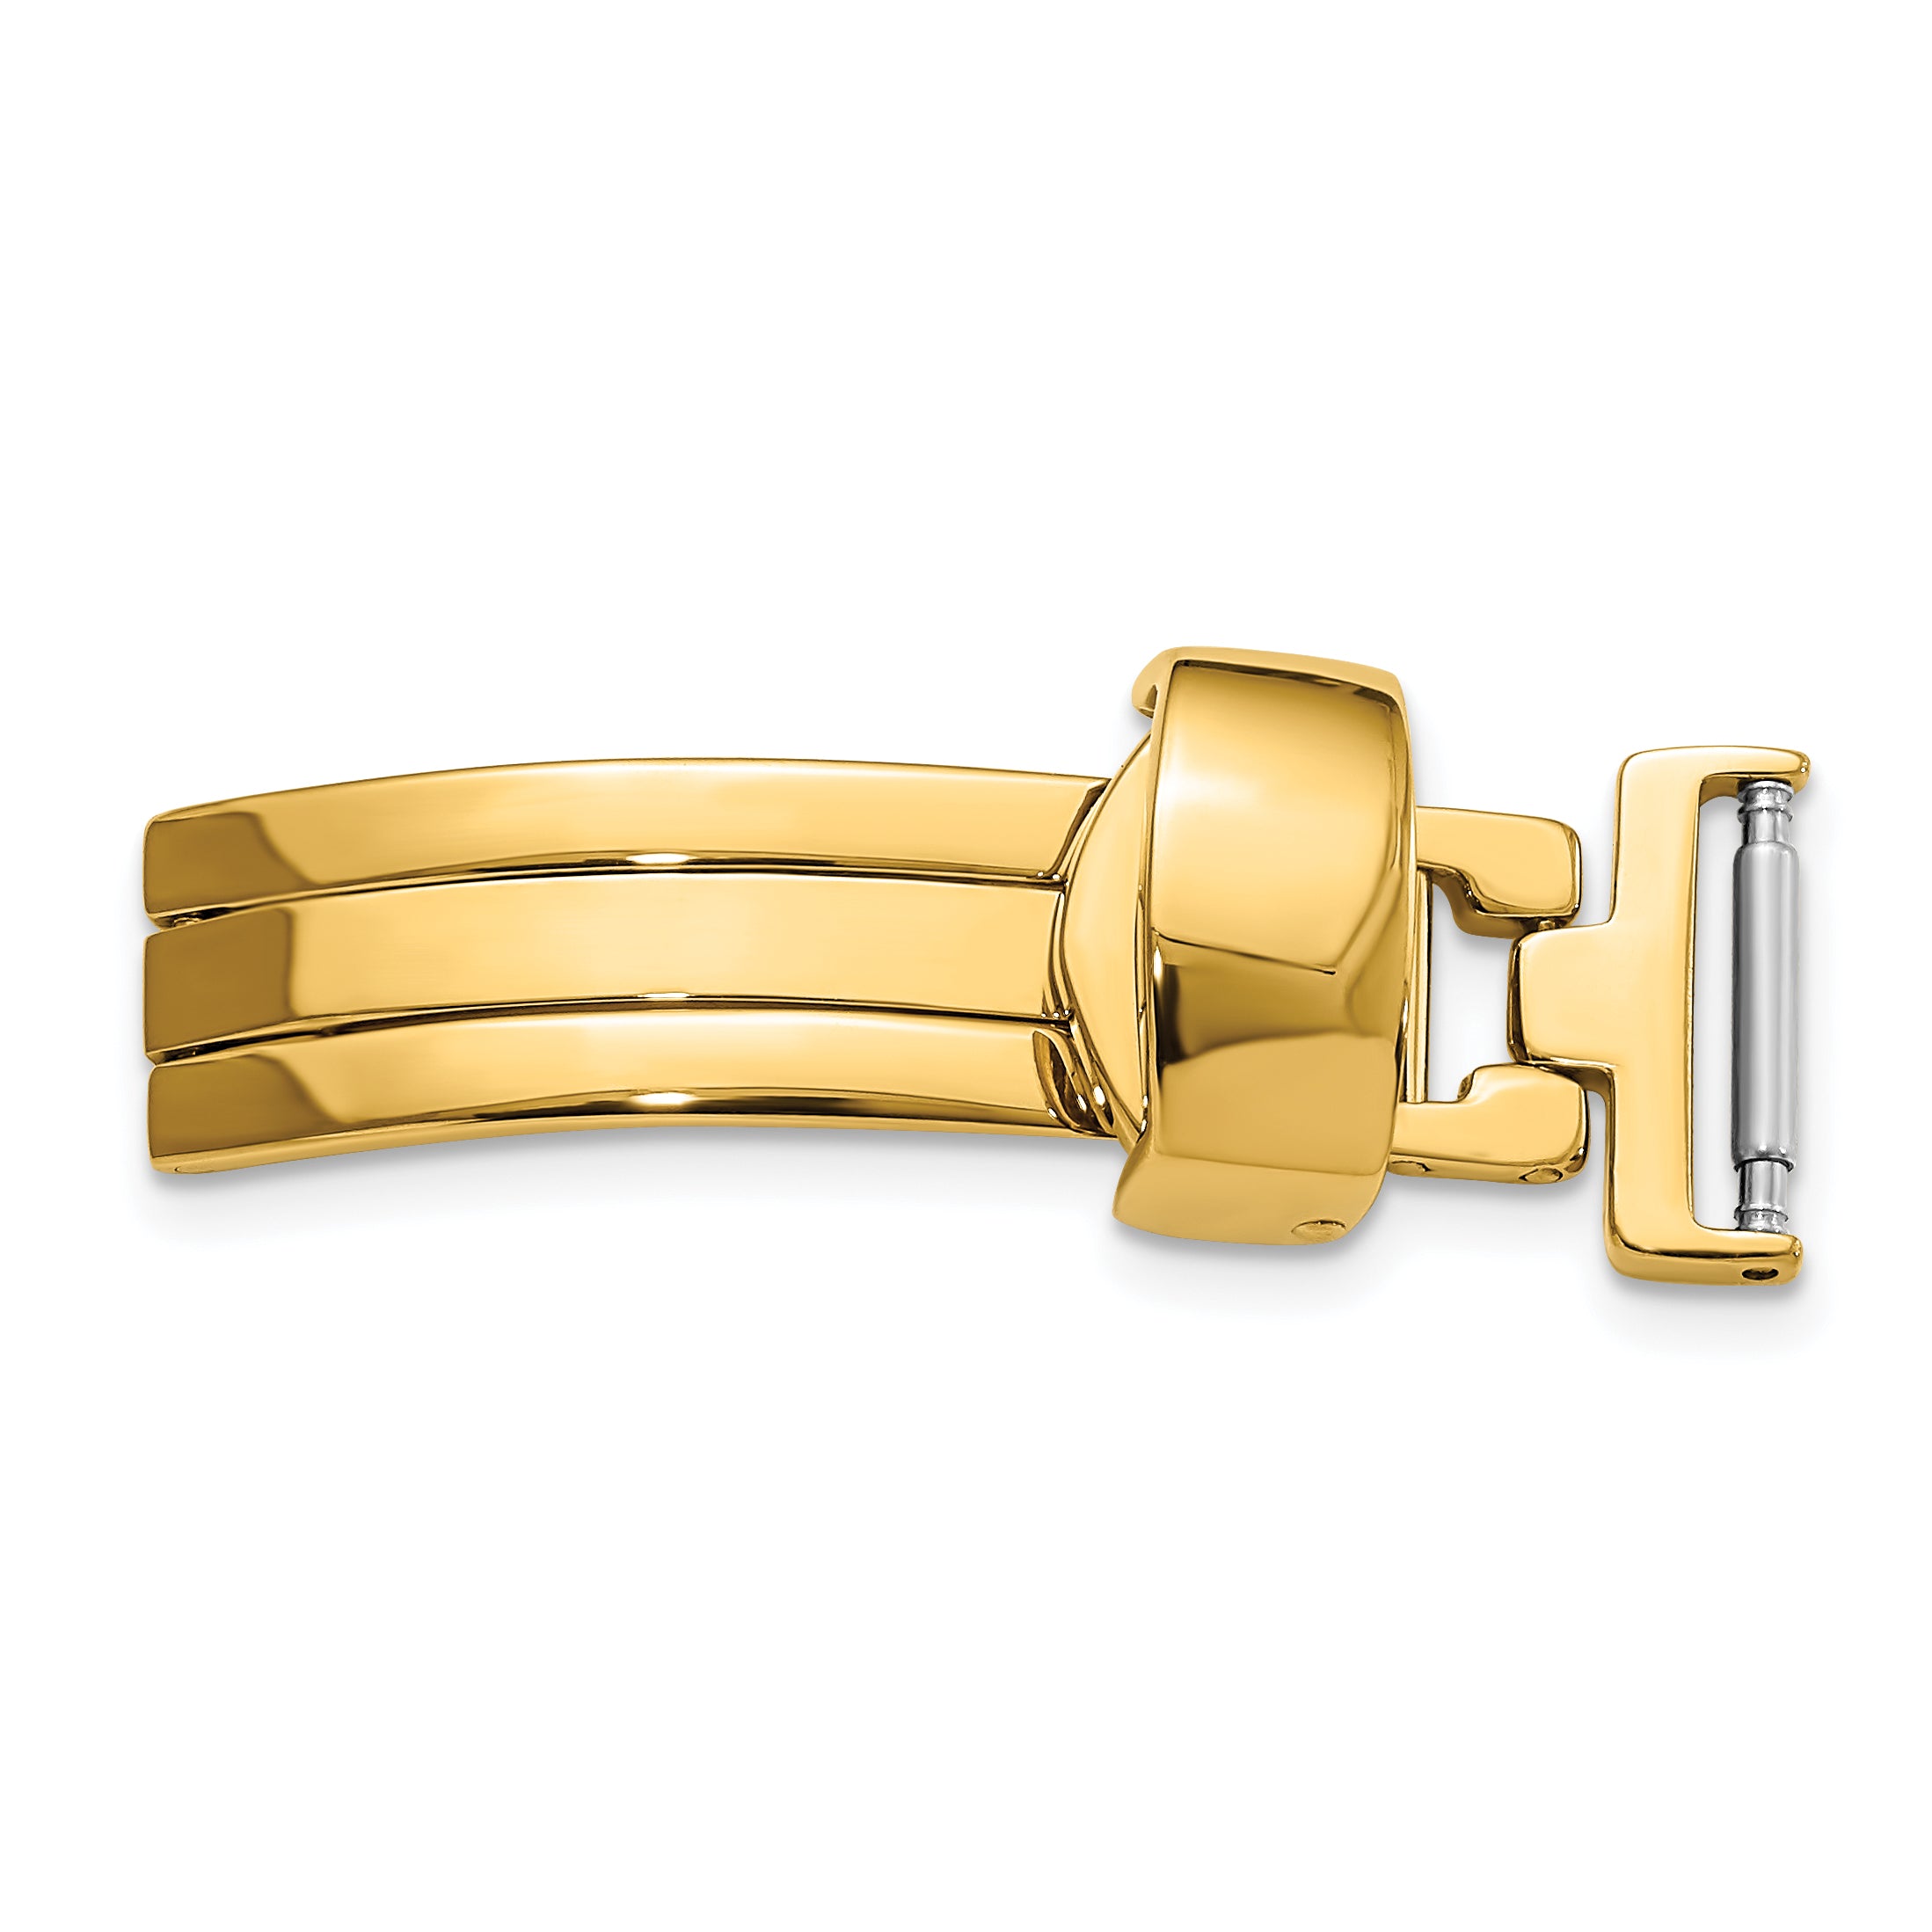 12mm Gold-tone Deployment Buckle